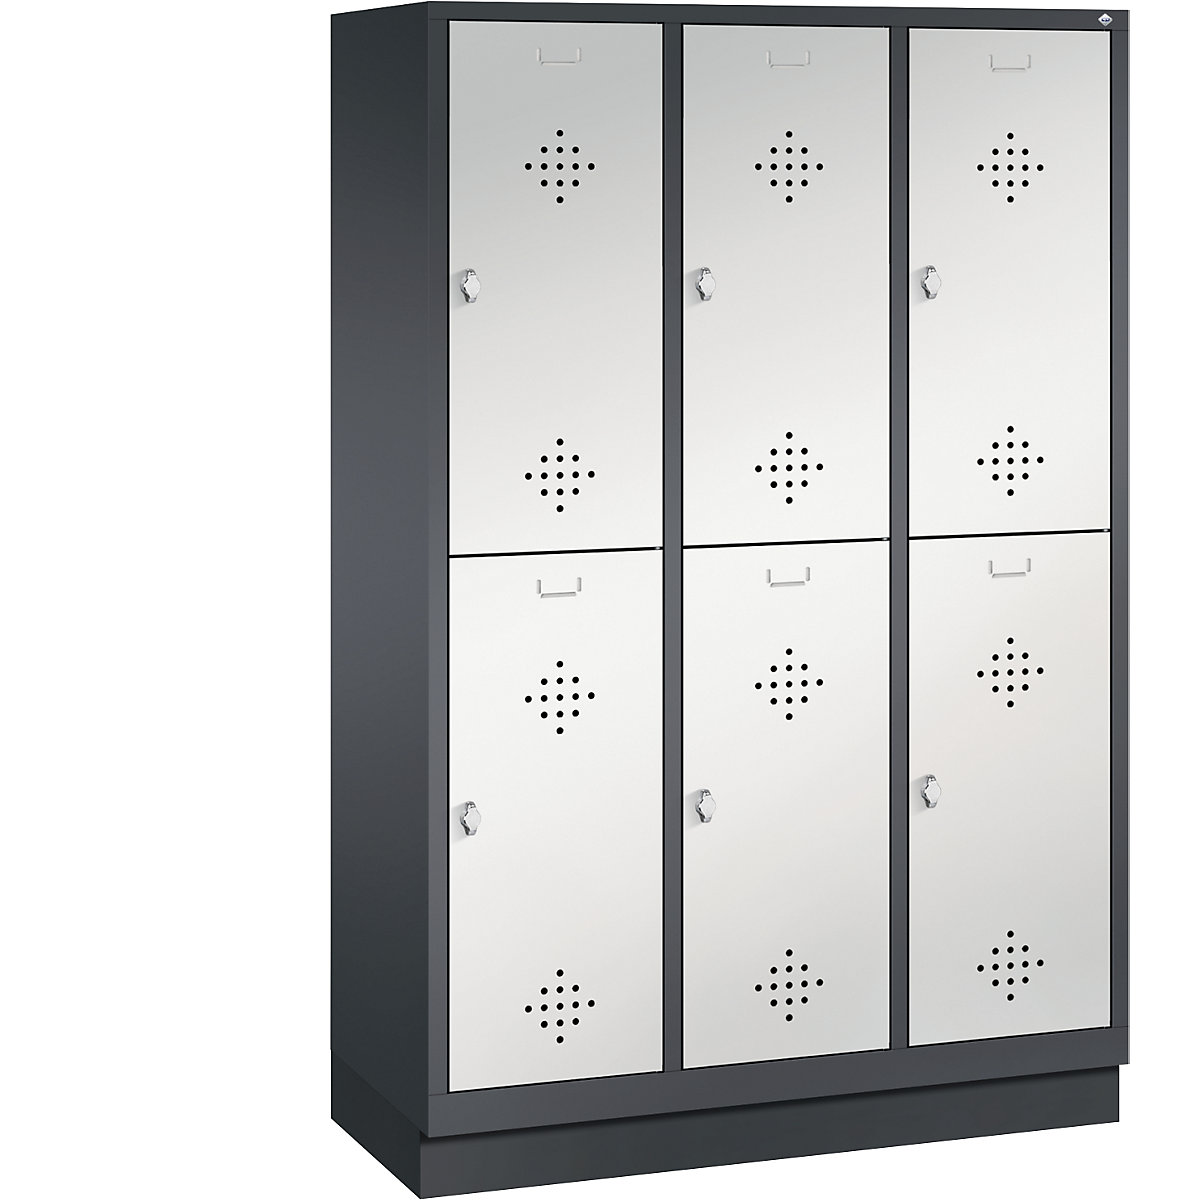 CLASSIC cloakroom locker with plinth, double tier – C+P, 3 compartments, 2 shelf compartments each, compartment width 400 mm, black grey / light grey-12